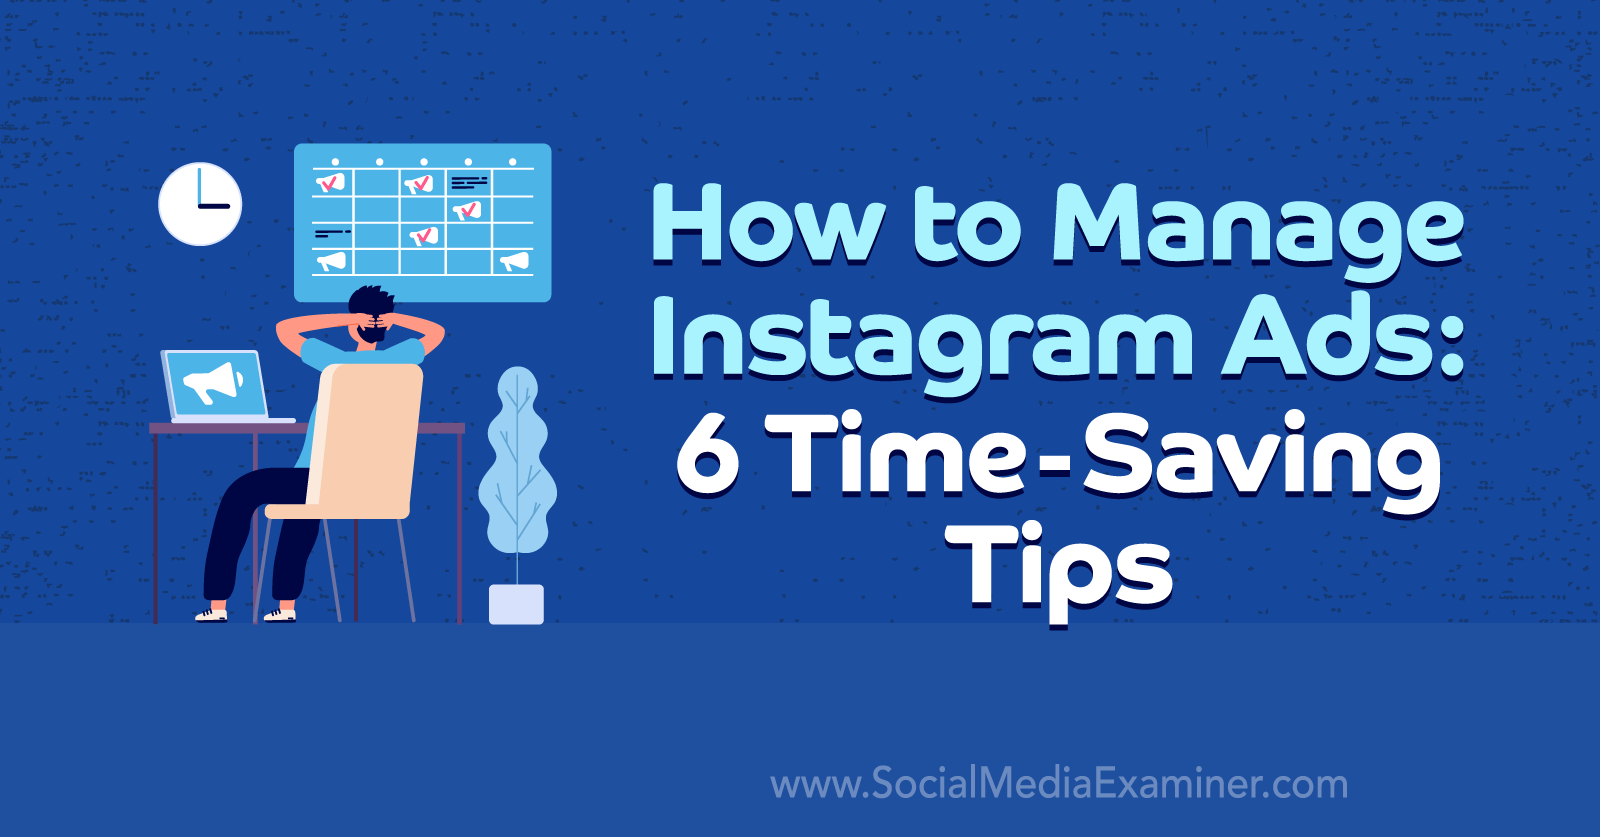 How to Manage Instagram Ads: 6 Time-Saving Tips by Anna Sonnenberg